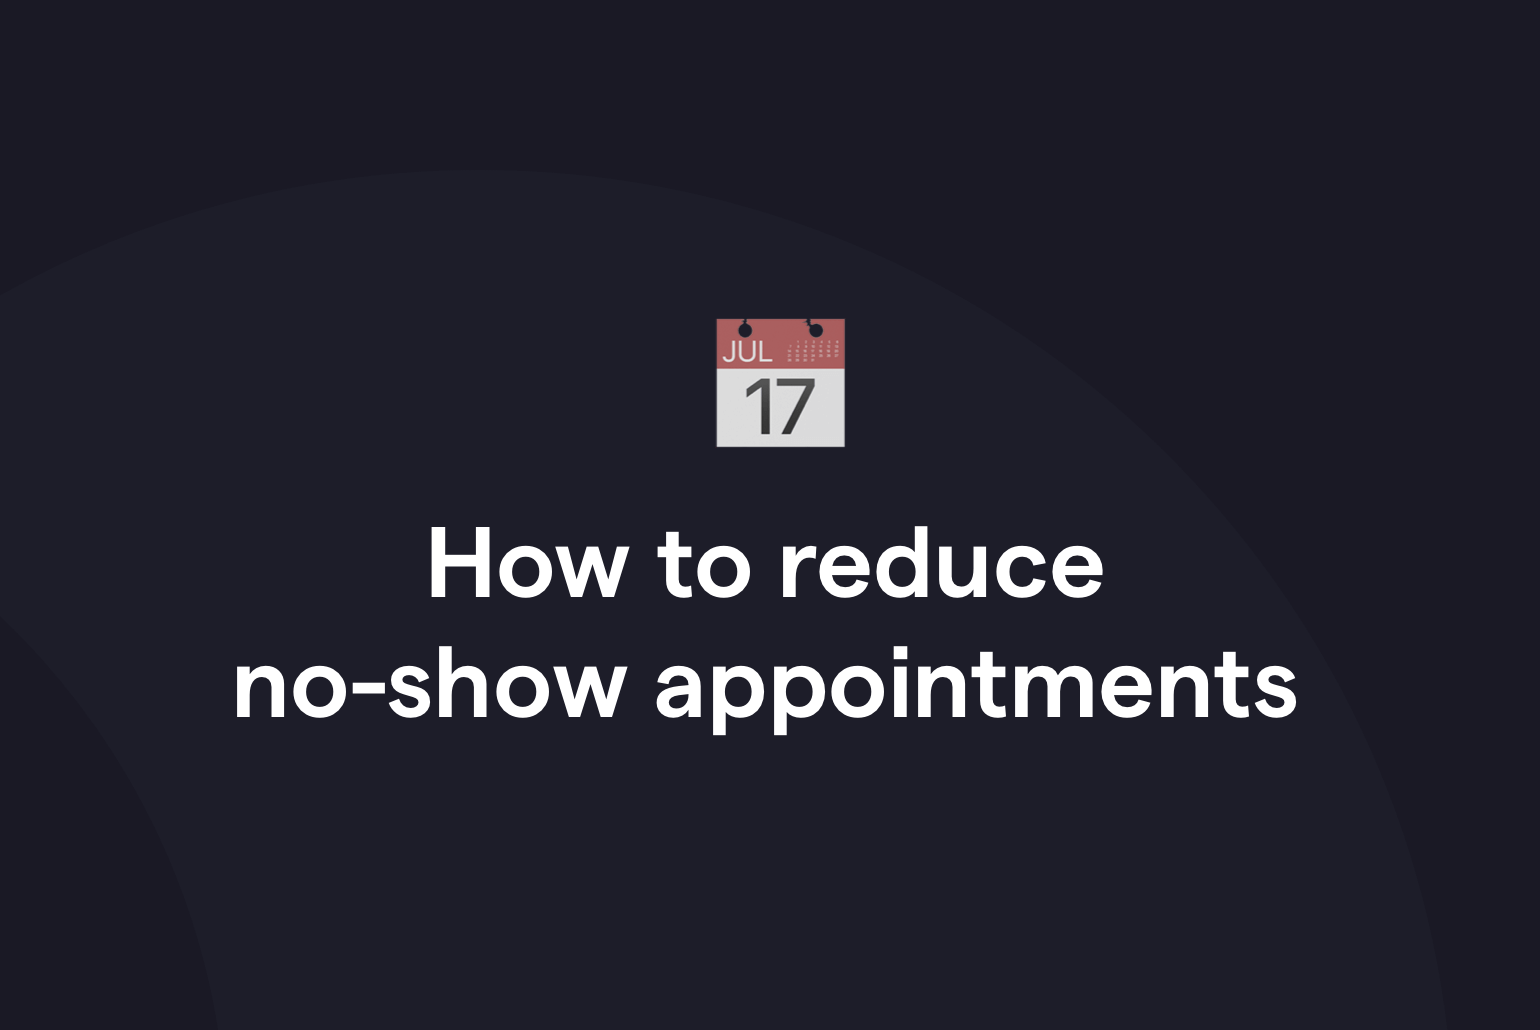 How to reduce no-show appointments